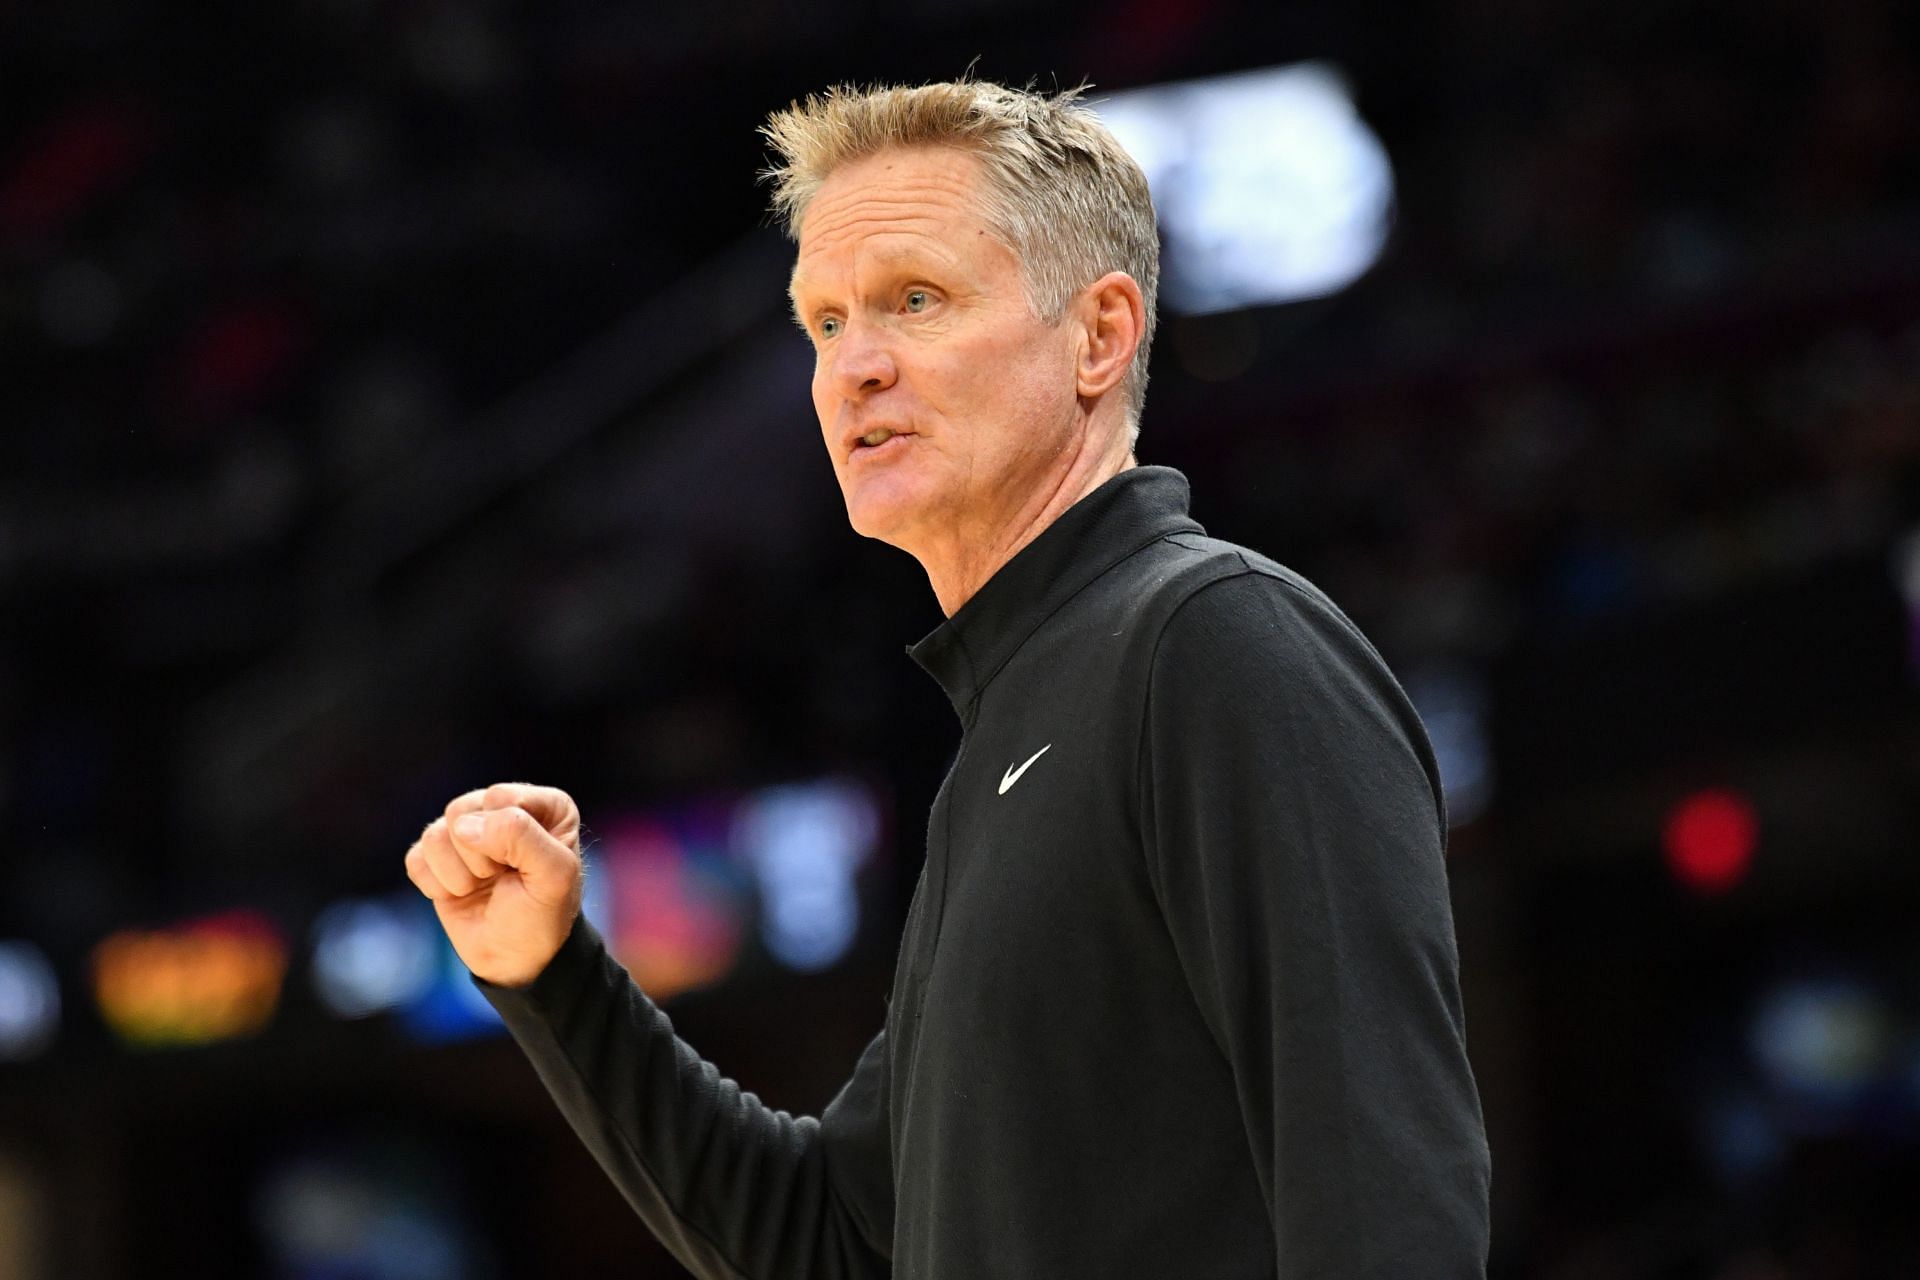 Coach Steve Kerr of the Golden State Warriors communicates with his players during the second half against the Cleveland Cavaliers on Nov. 18, 2021, in Cleveland, Ohio. The Warriors won 104-89.